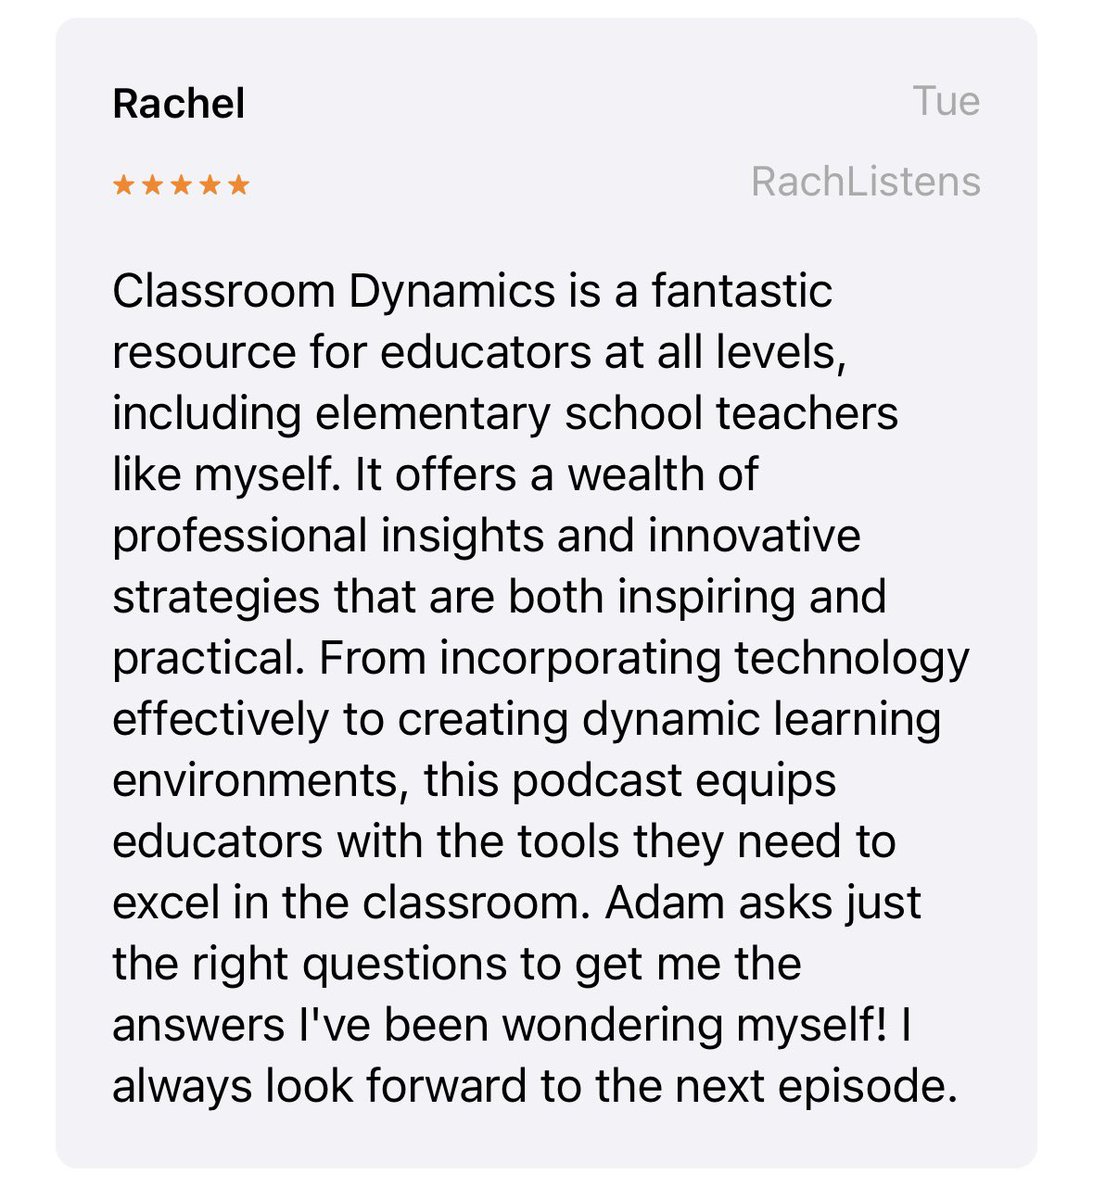 Love when our listeners give us feedback that hit on exactly what we strive to do!! Listen to Classroom Dynamics for more #edtech support! #edchat #teachertips 🎧 podcasts.apple.com/us/podcast/cla…